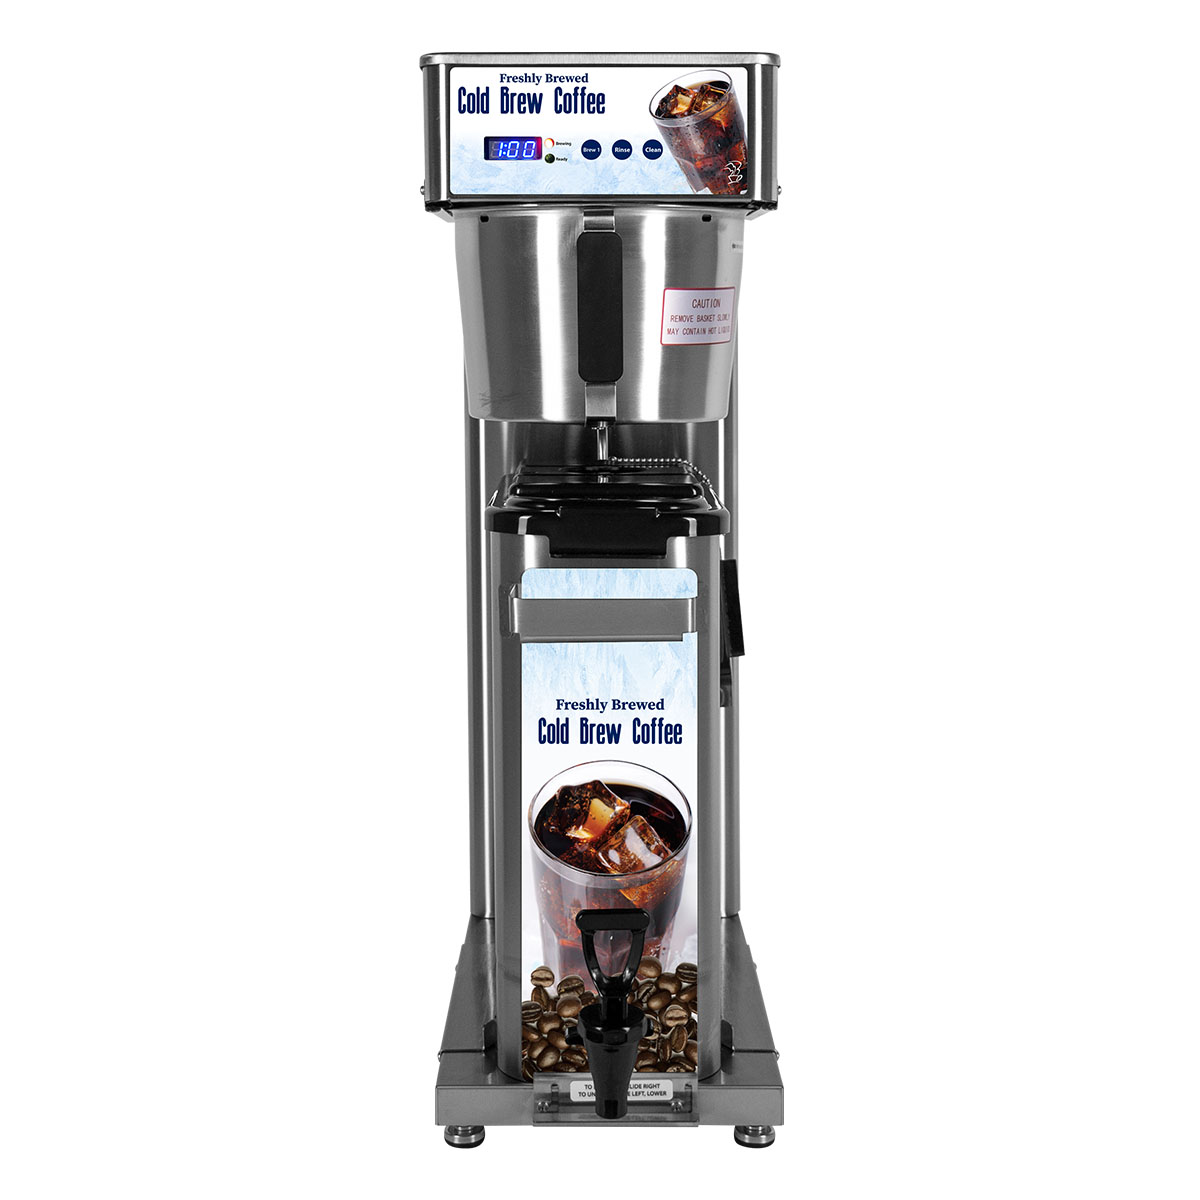 https://www.newcocoffee.com/wp-content/uploads/2022/04/ColdBrew_Dispenser_Front2.jpg